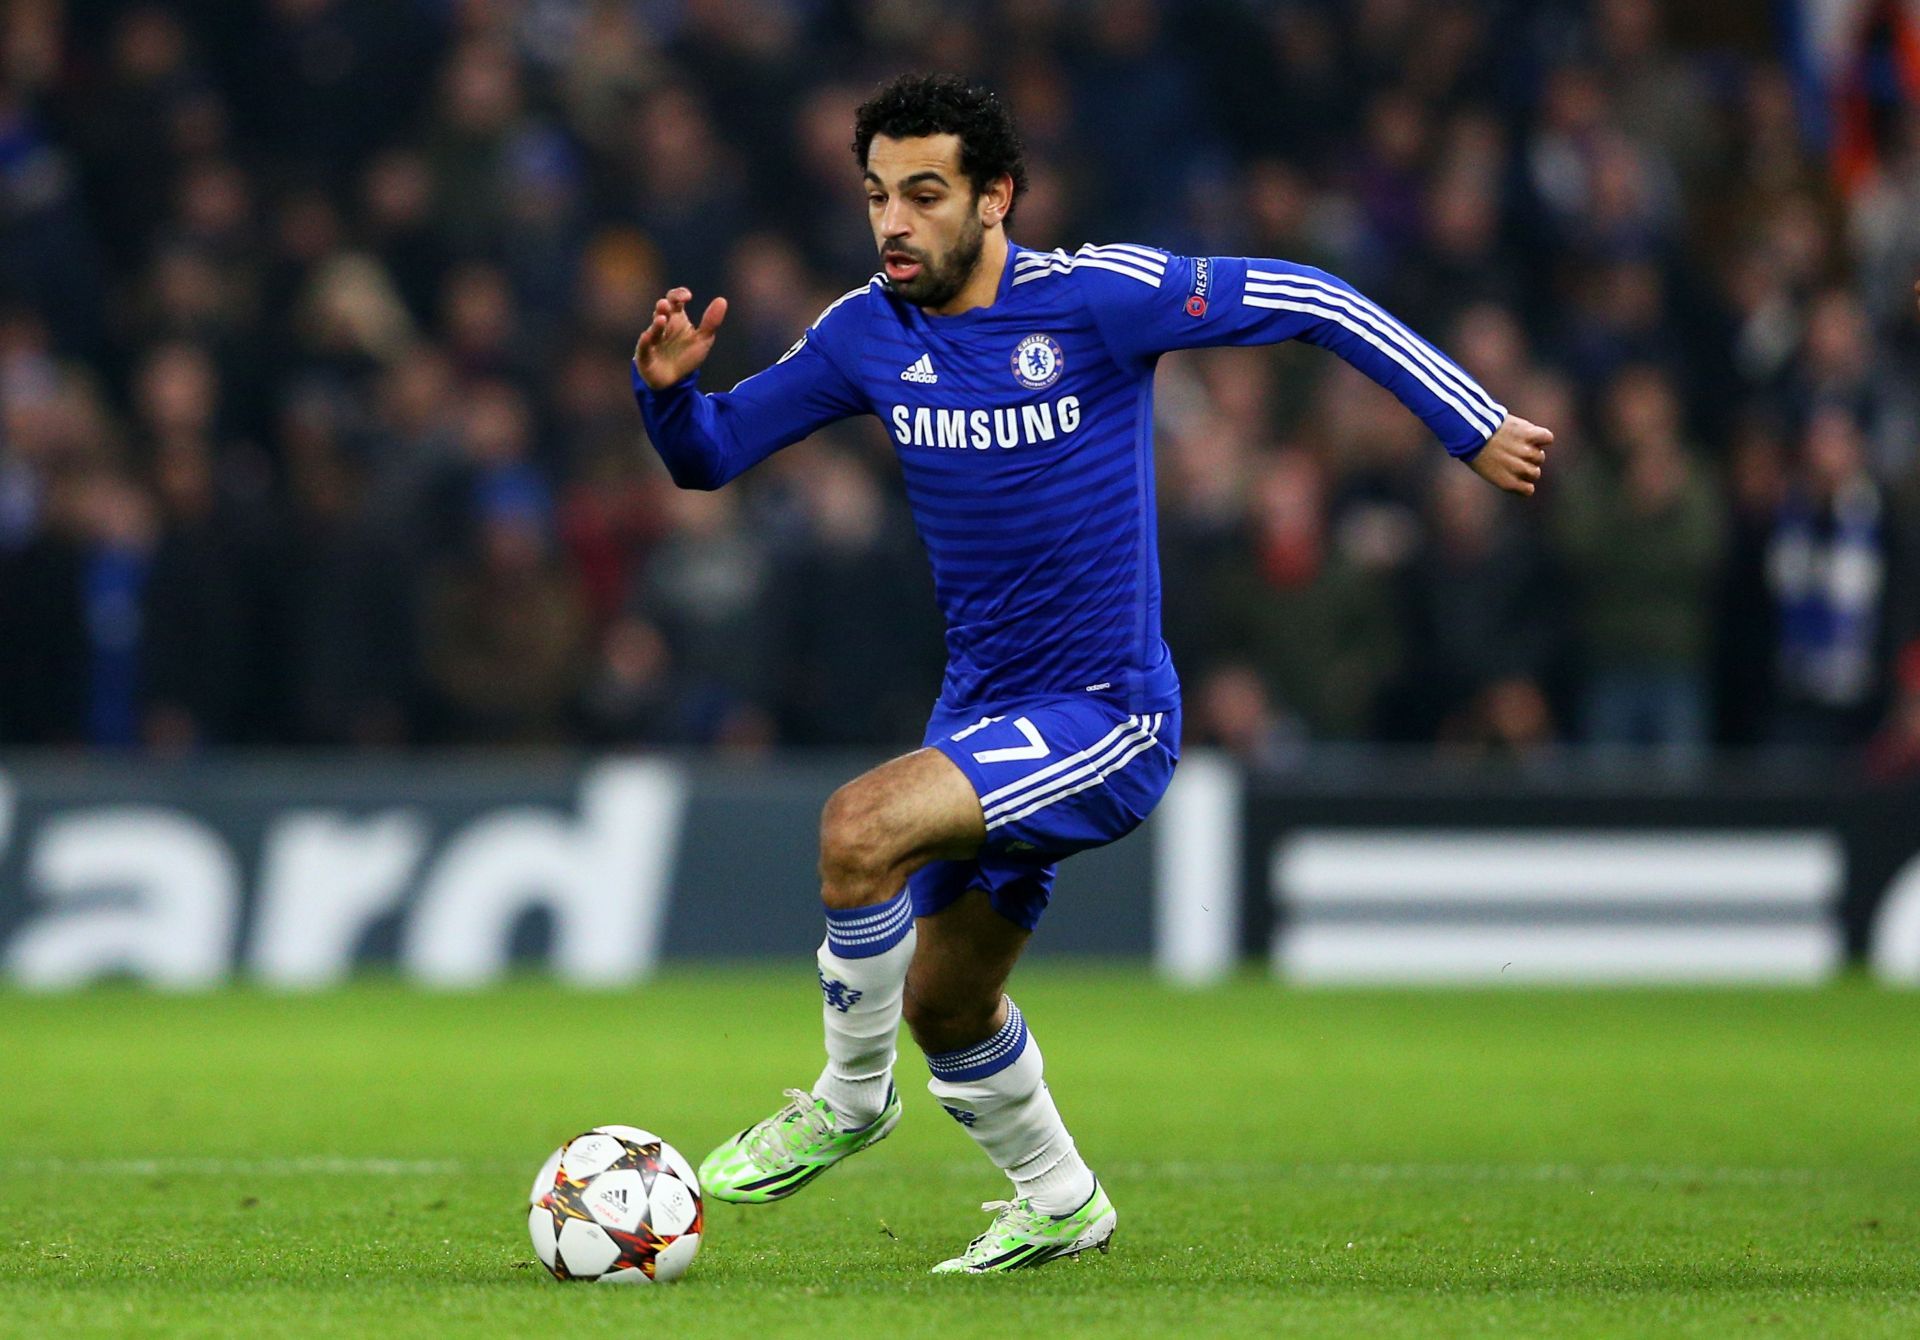 Salah could have made a return to Chelsea